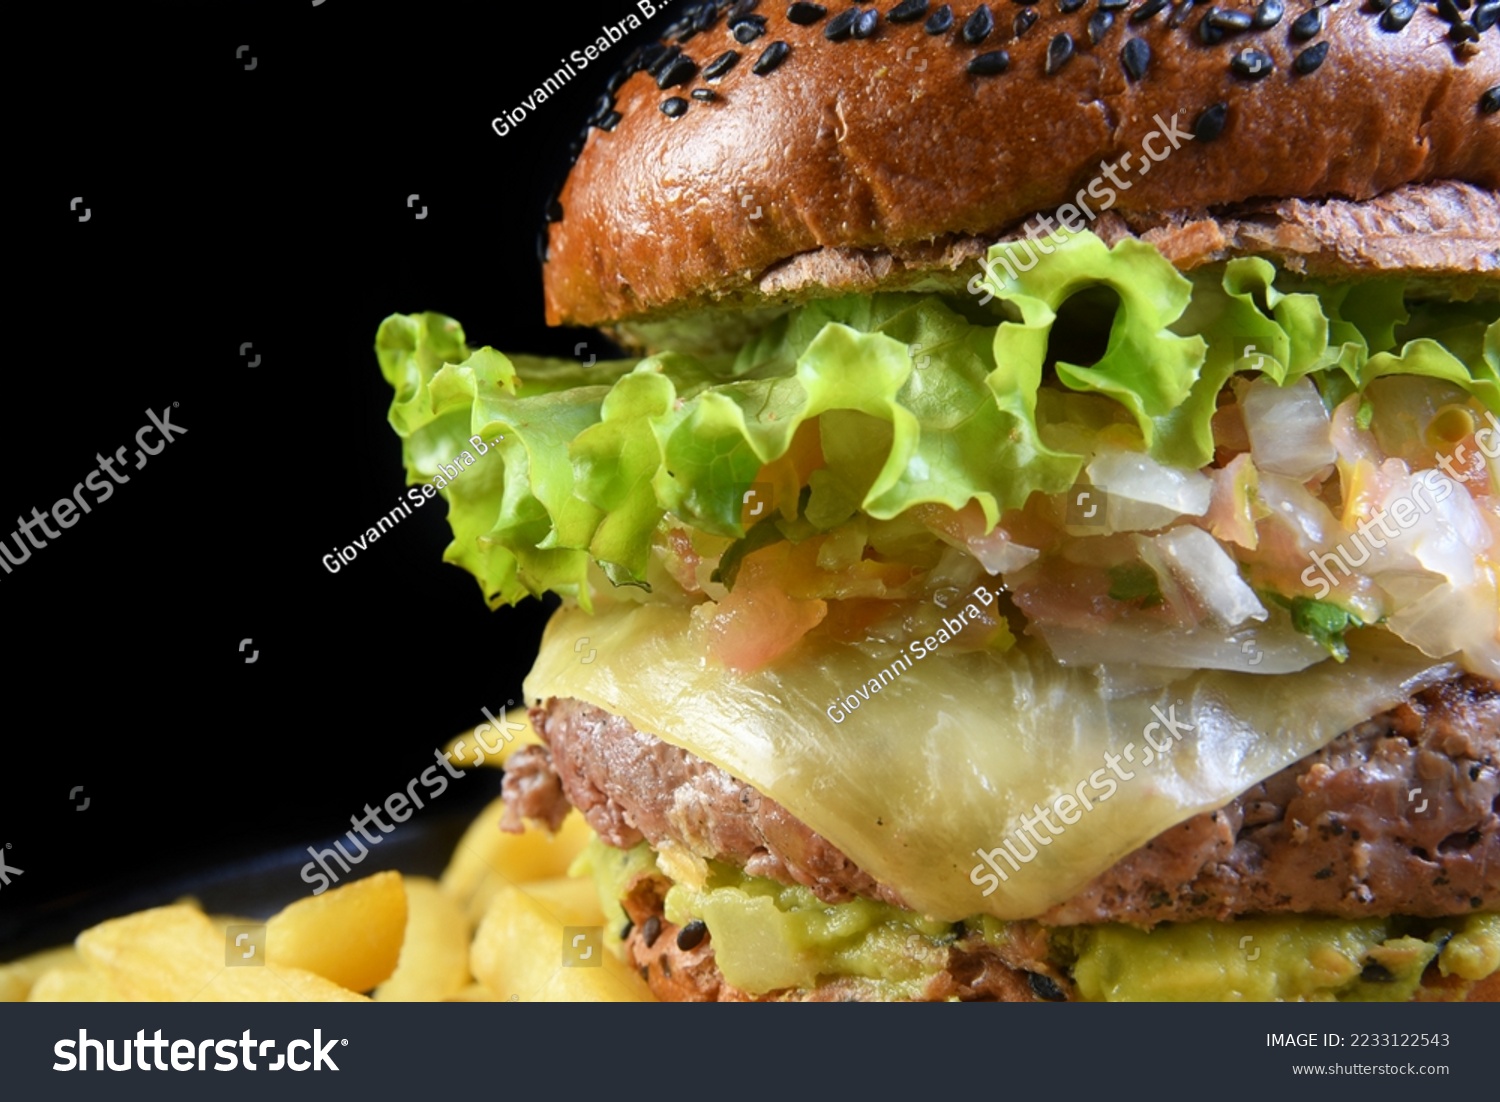 beef burger sandwich with french fries salad and cheese #2233122543